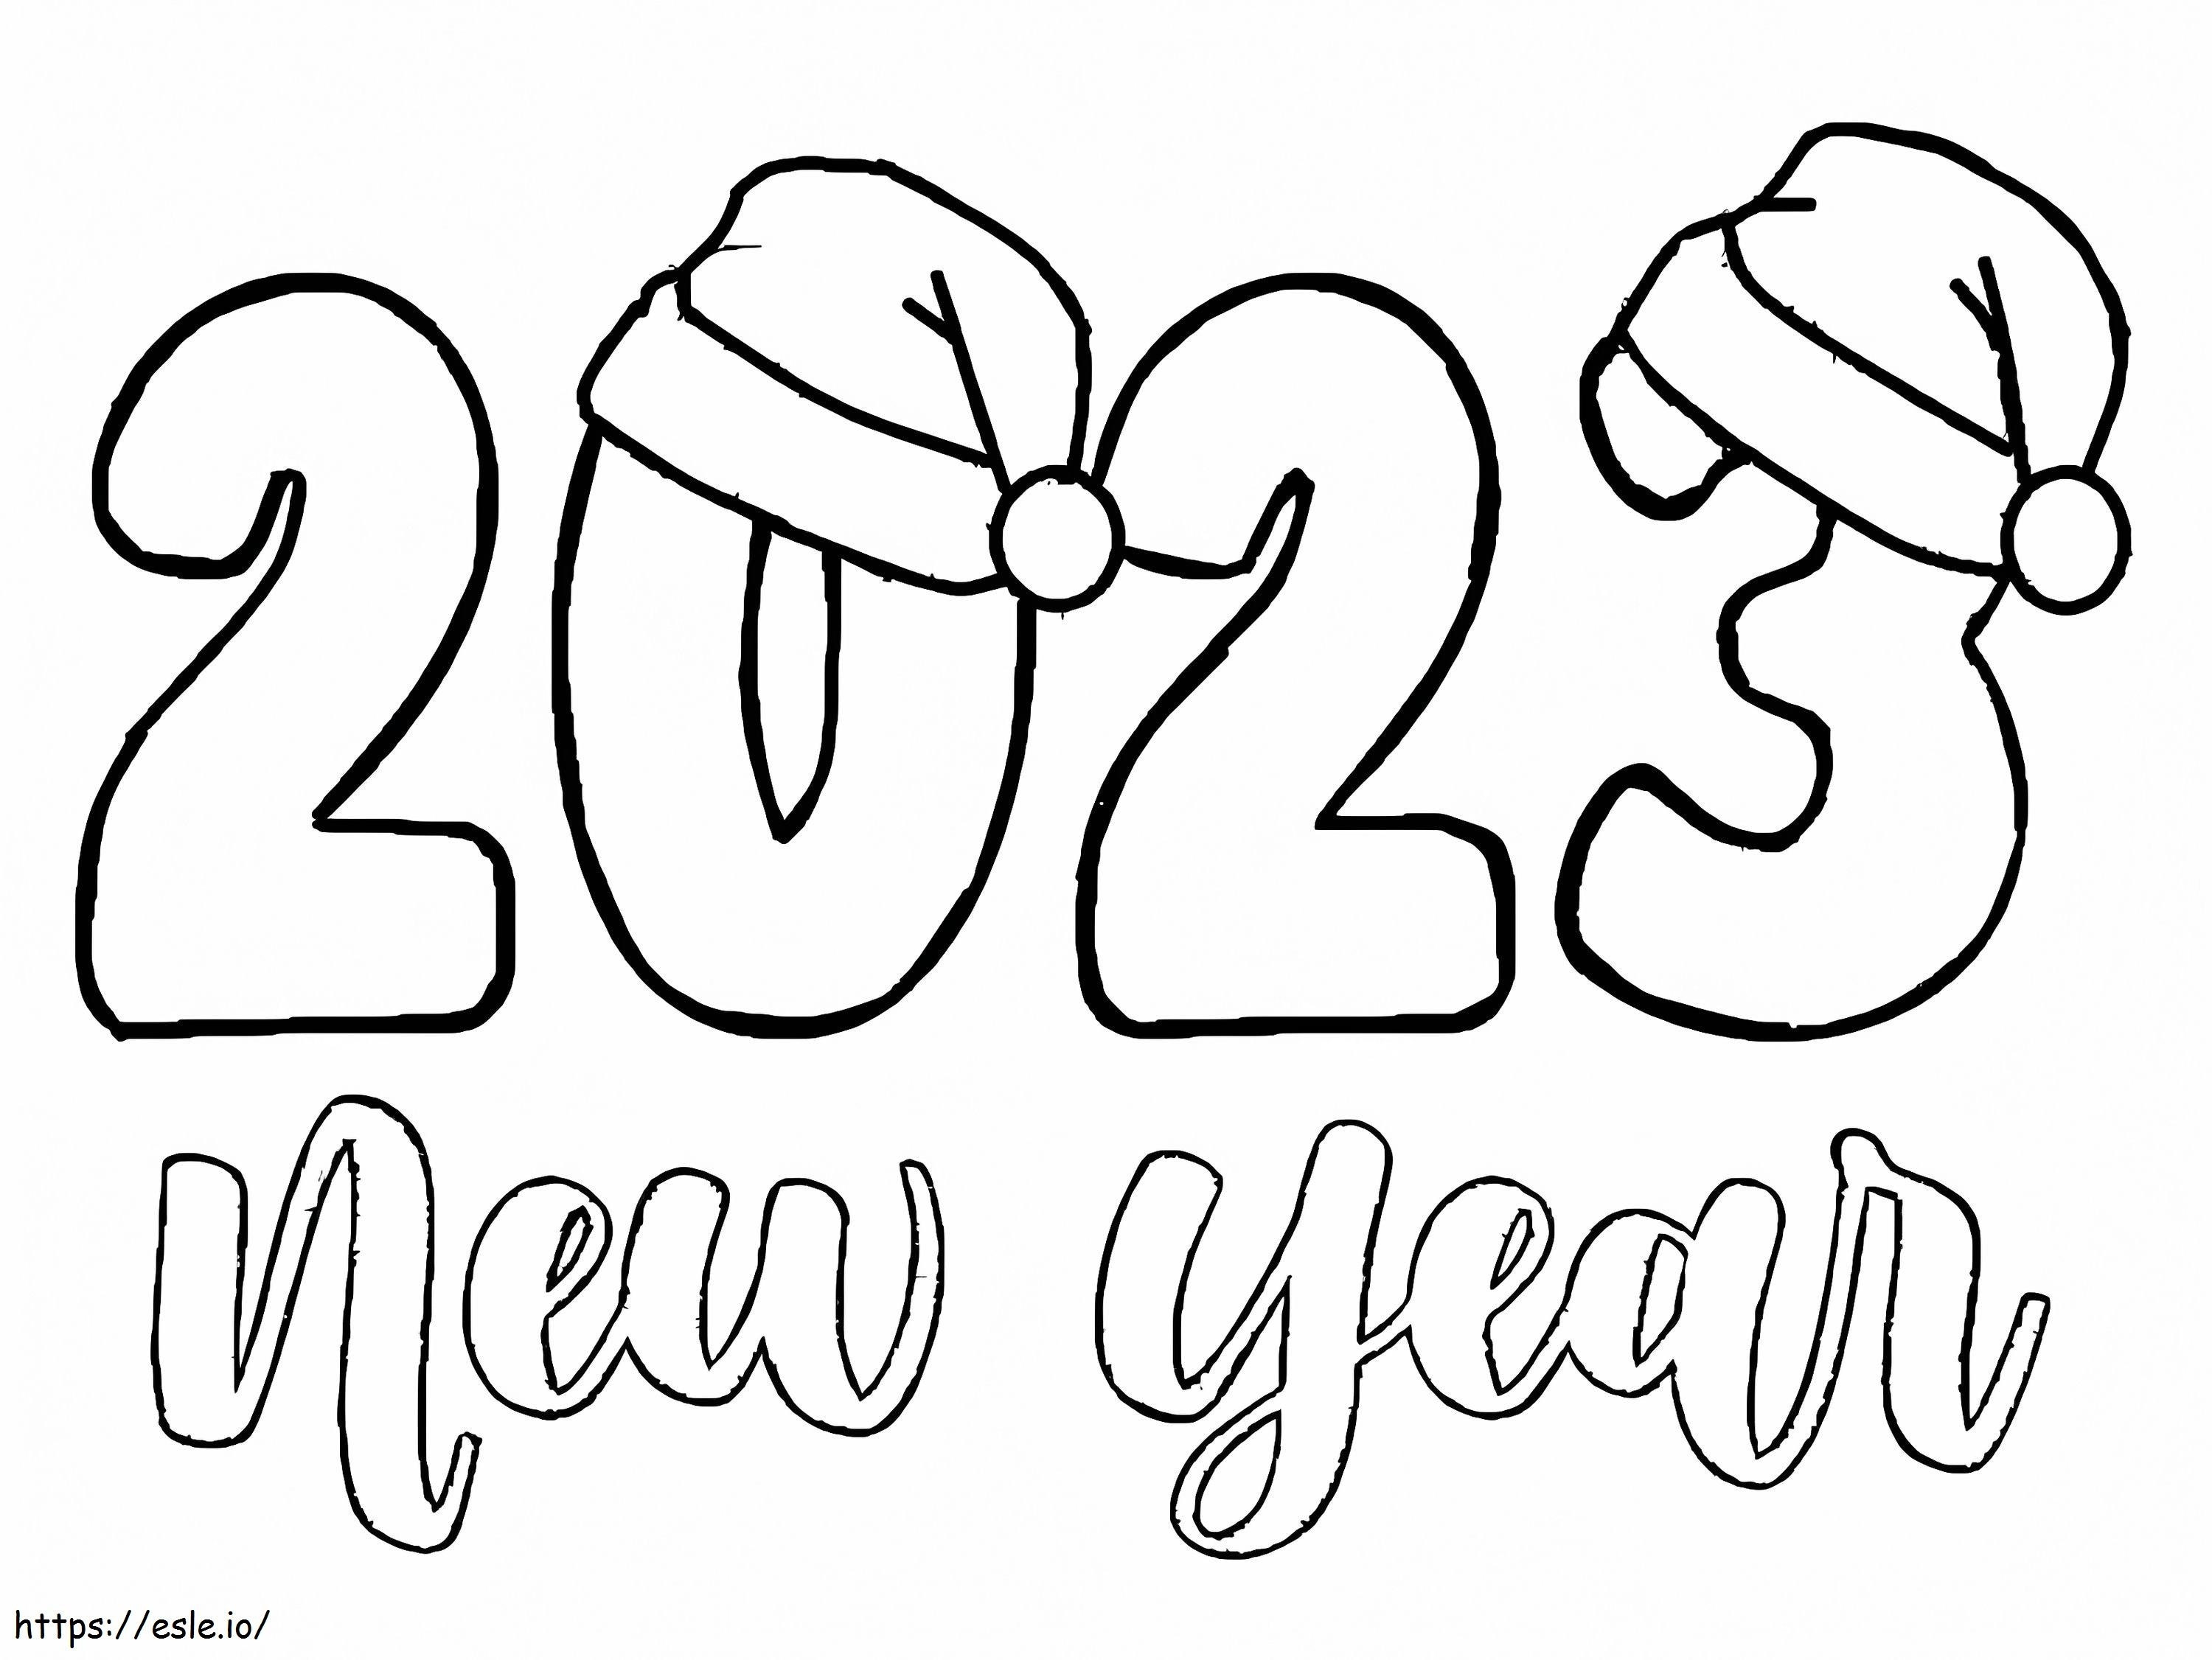 Printable New Year 2023 coloring page